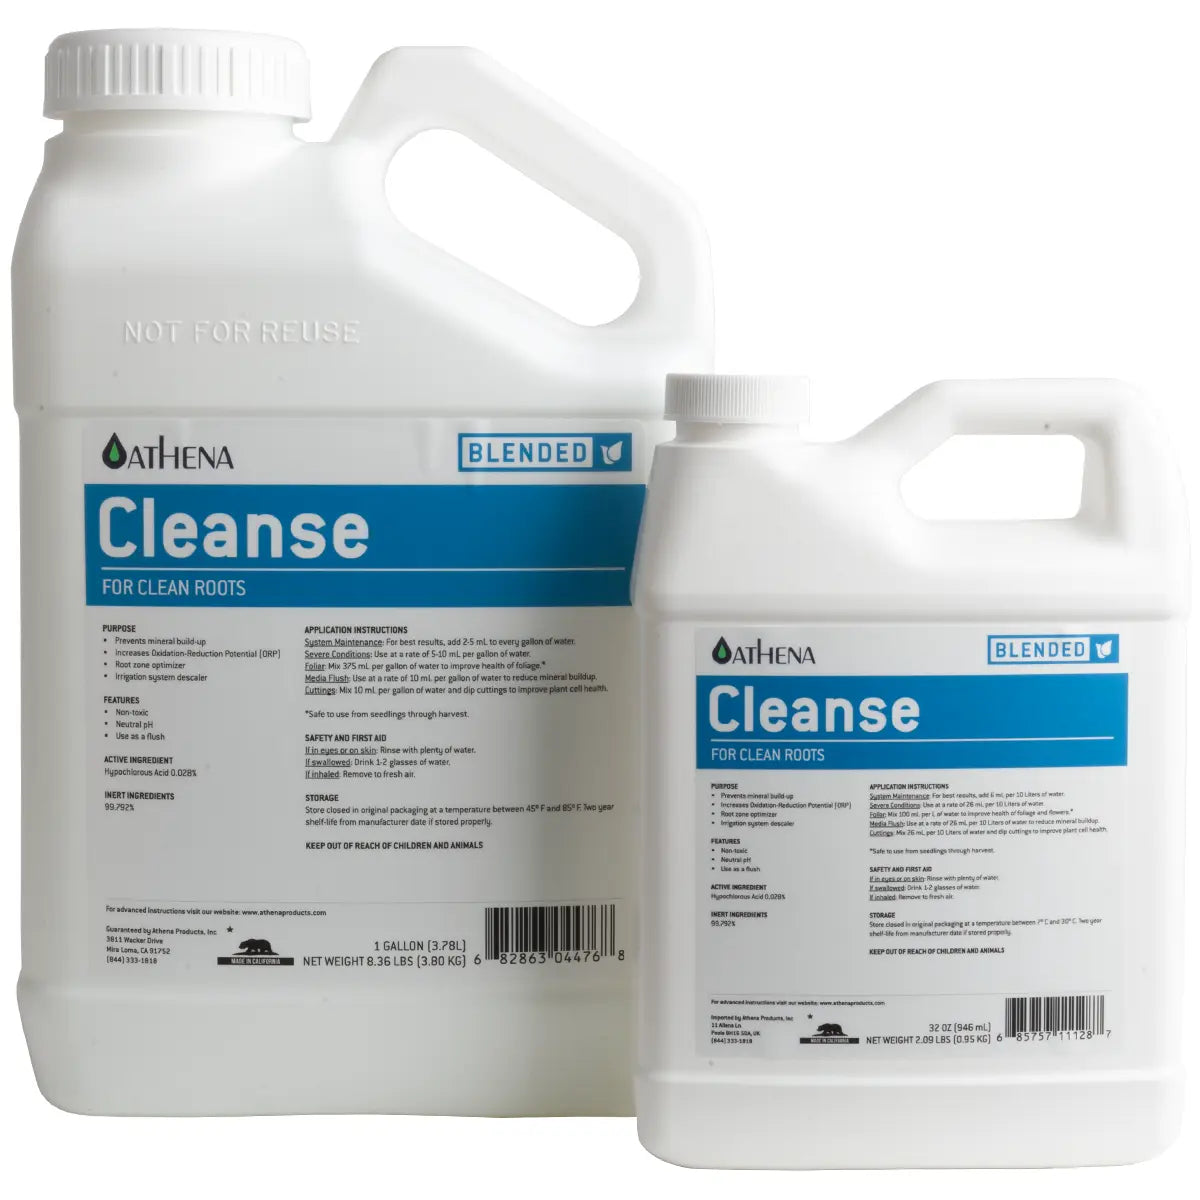 Athena Nutrients - Blended Line - Cleanse